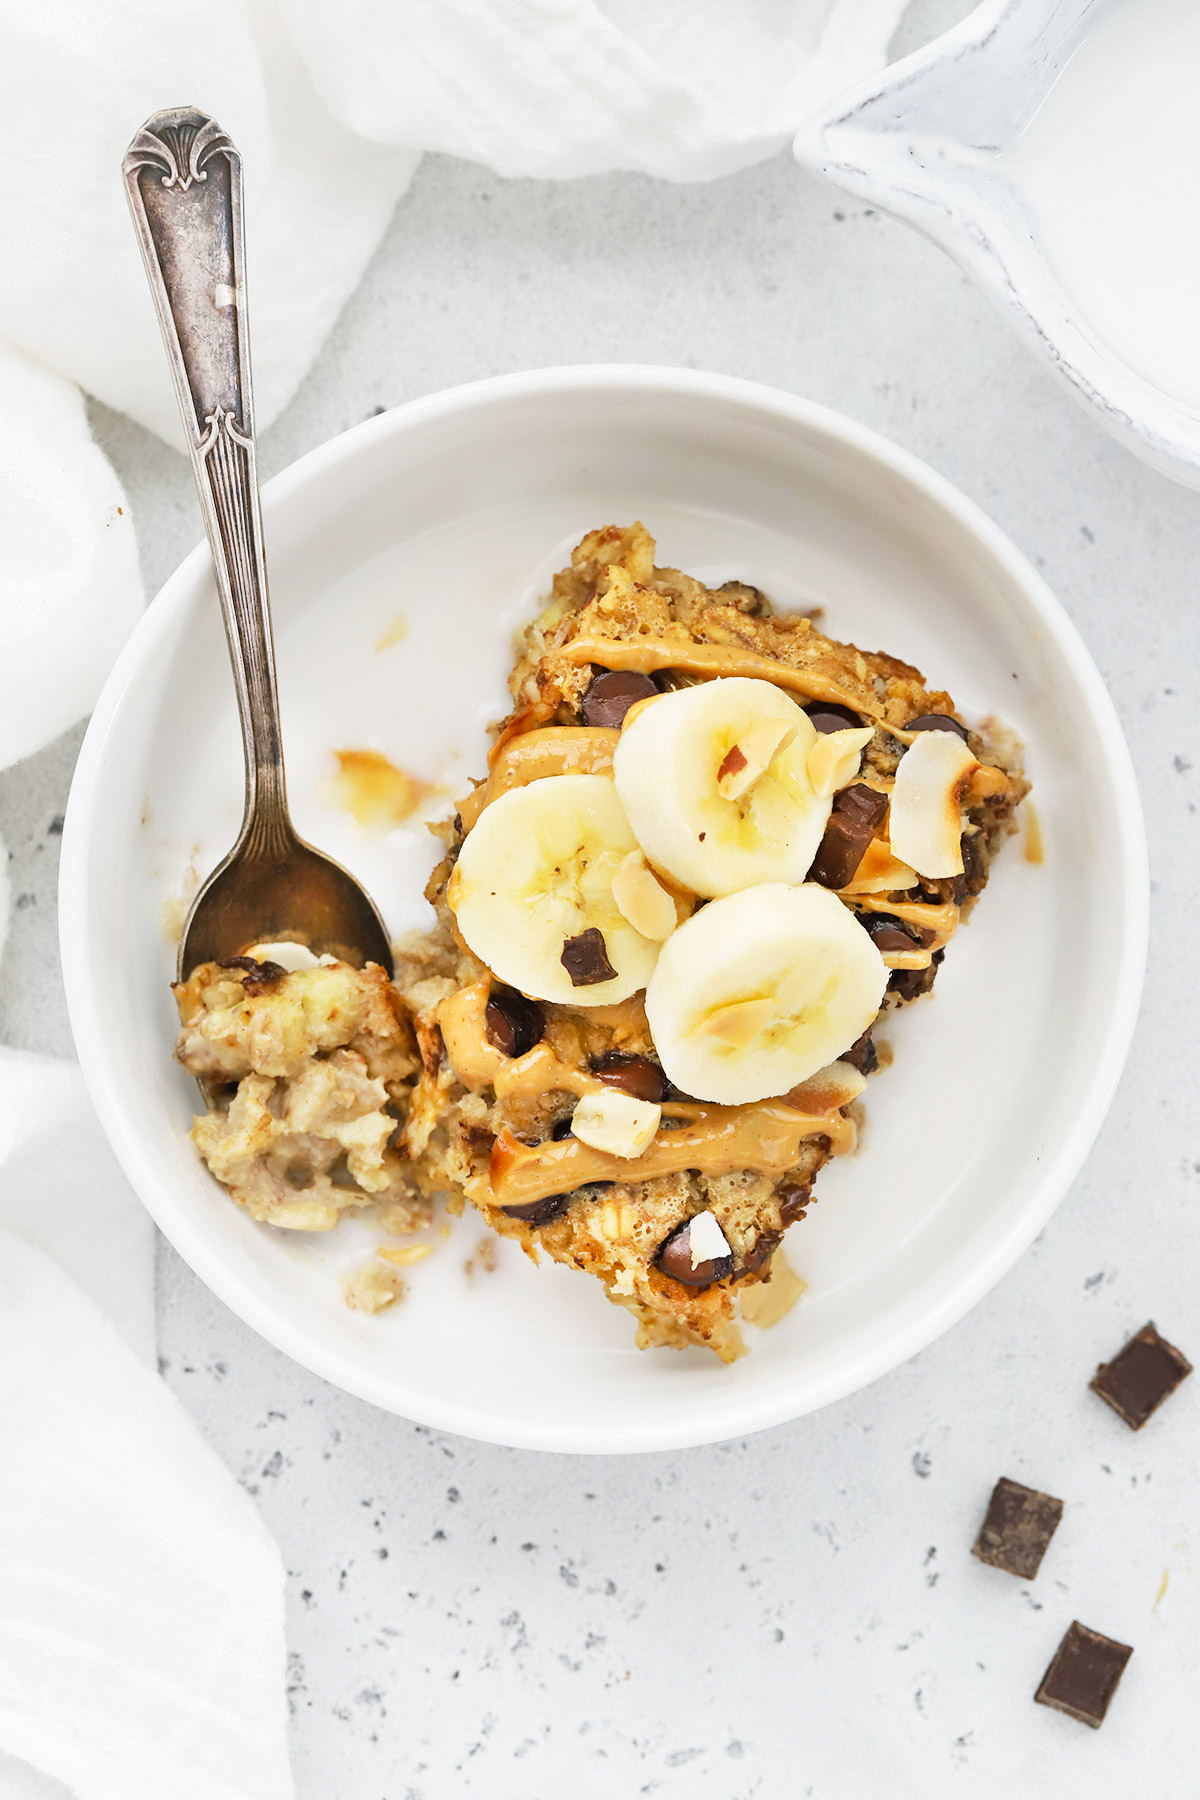 Overhead view of a bowl of Chunky Monkey Baked Oatmeal topped with bananas, drizzled peanut butter, and milk.